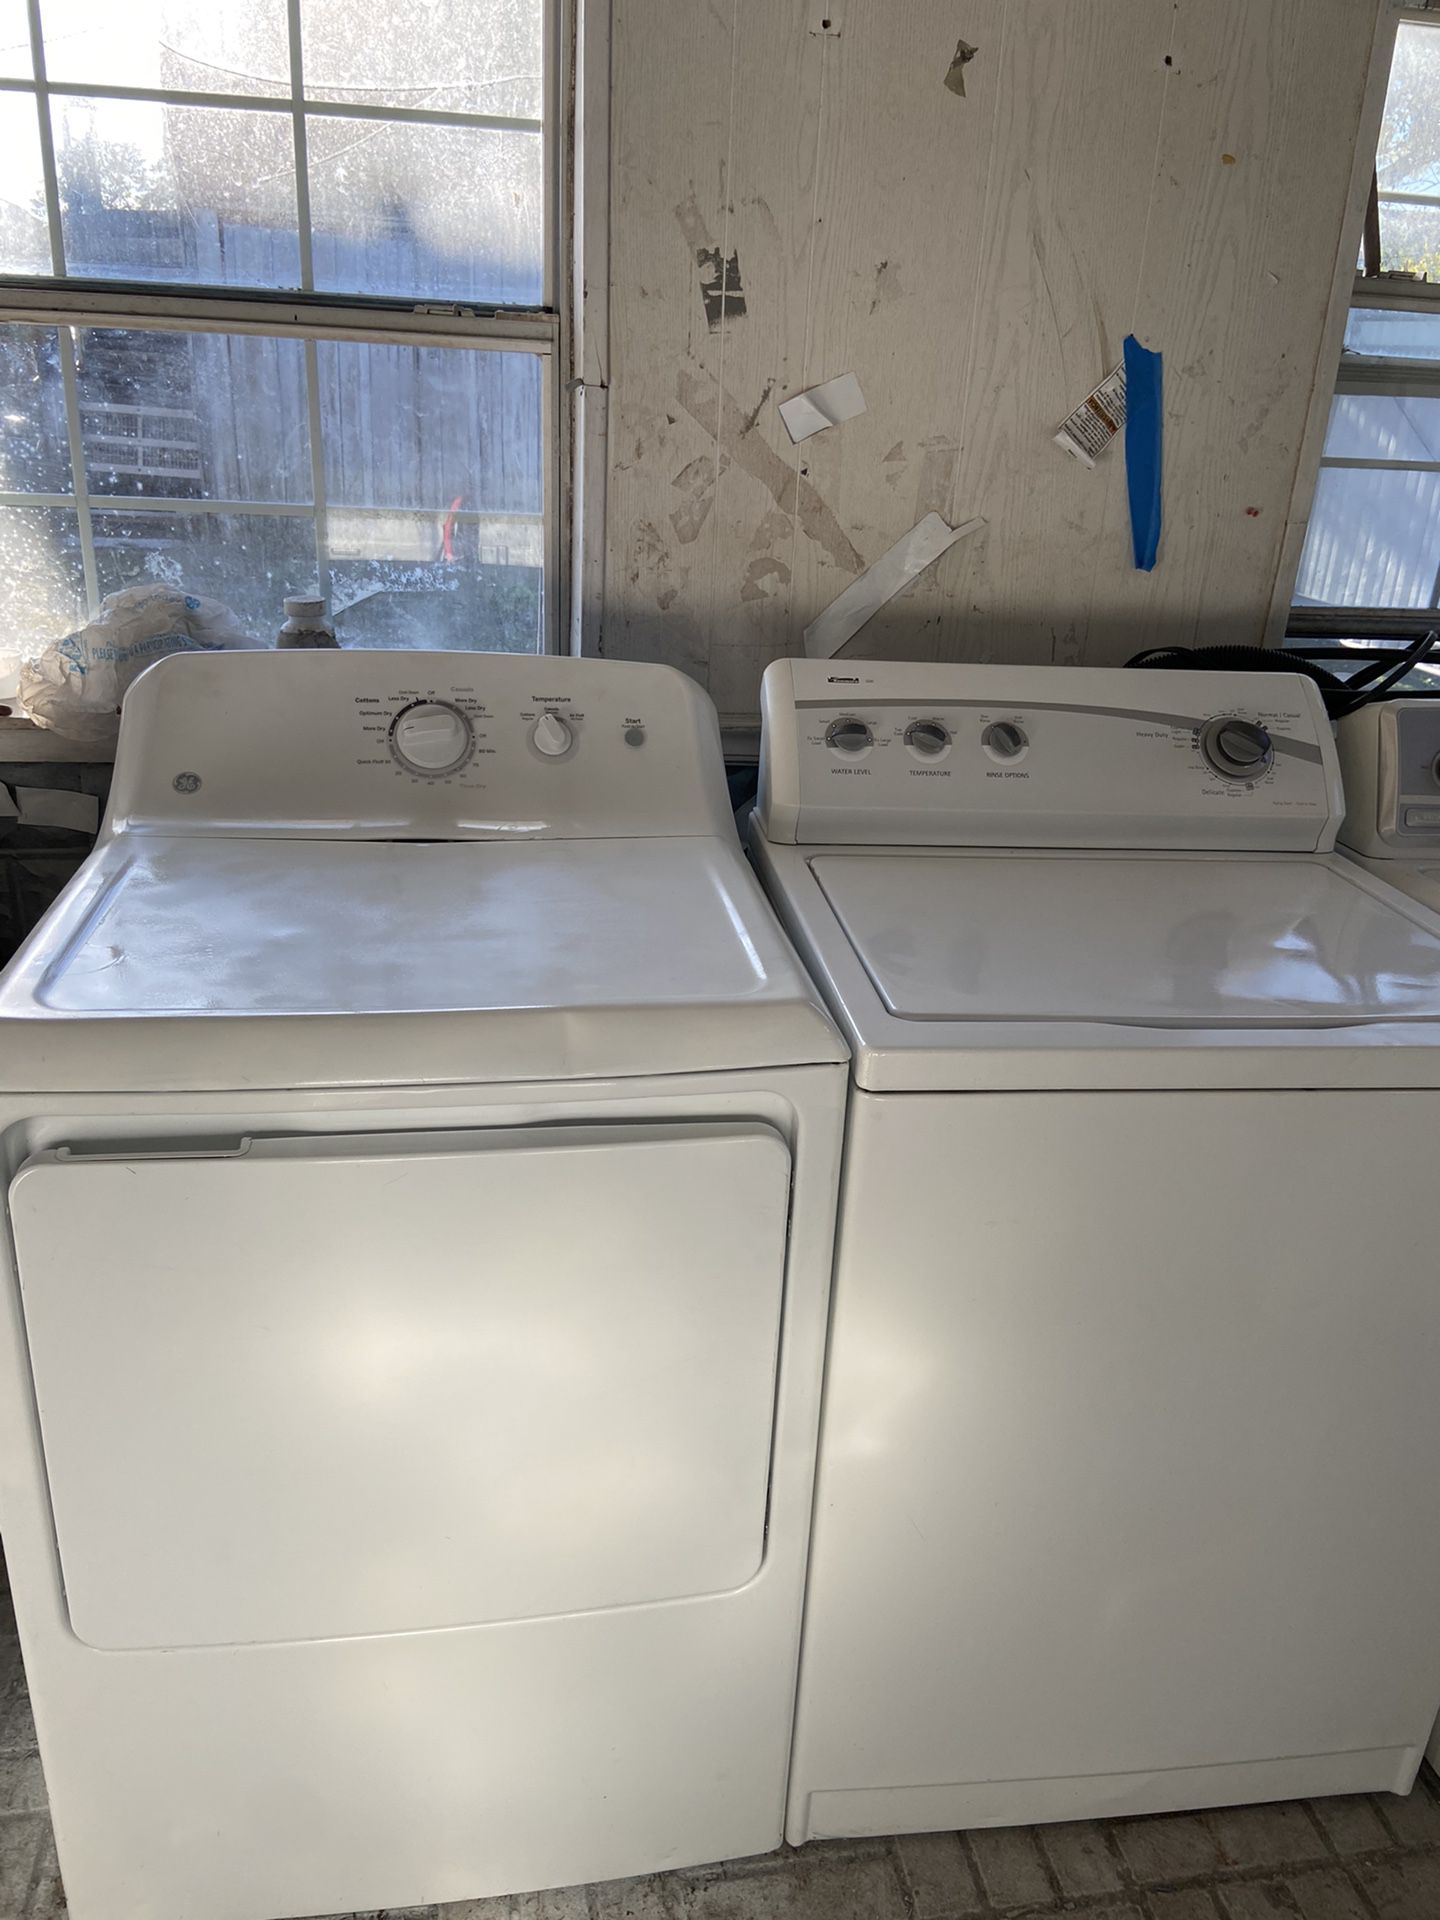 ILL RUN BOTH FOR YOU!! EXCELLANT RUNNING KENMORE SUPER LOAD WASHER & G.E.  ELECTRIC DRYER! NO ISSUES WITH EITHER. IM IN MARRERO.